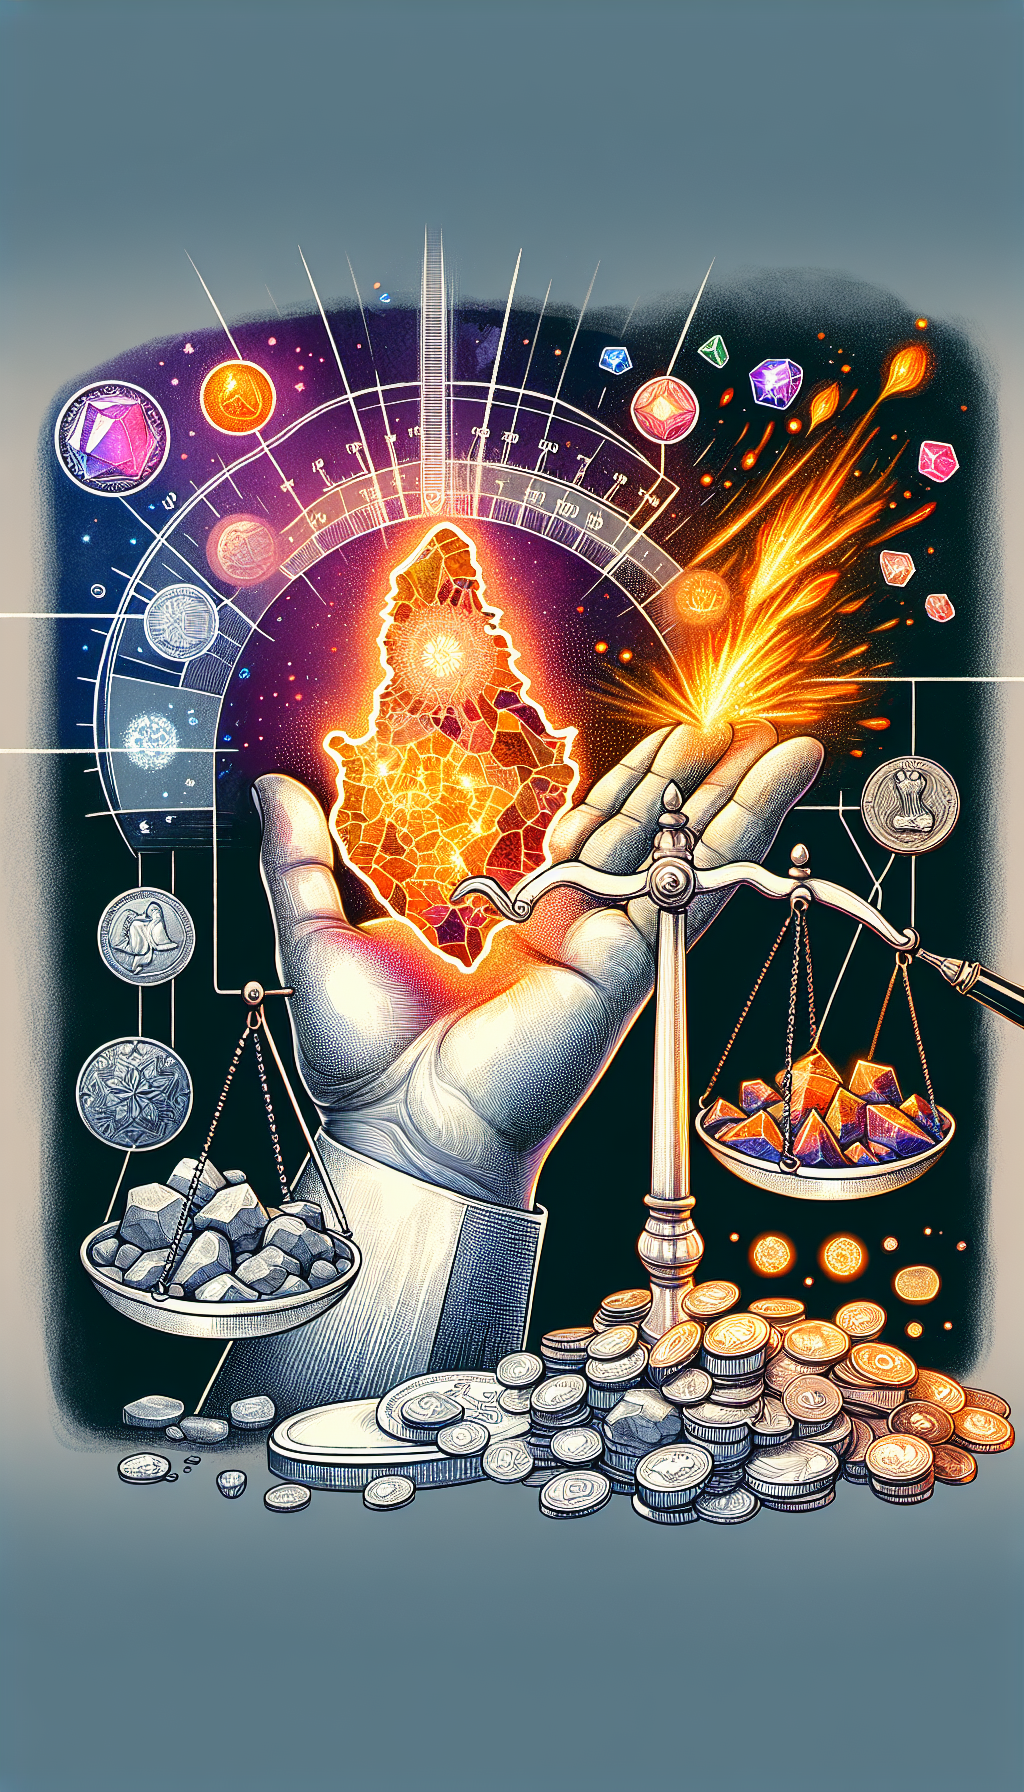 An illustration showcasing a hand delicately holding an intricate, glowing Indian Fire Starter Rock, surrounded by lesser stones. Above, an ethereal balance scale measures its radiance against a pile of coins and jewels, symbolizing its value. The rock emits fiery sparks, subtly forming the silhouette of the Indian subcontinent, with a magnifying glass overlaid, hinting at the examination of its worth. Each element is drawn in contrasting artistic styles—realistic, abstract, and geometric.